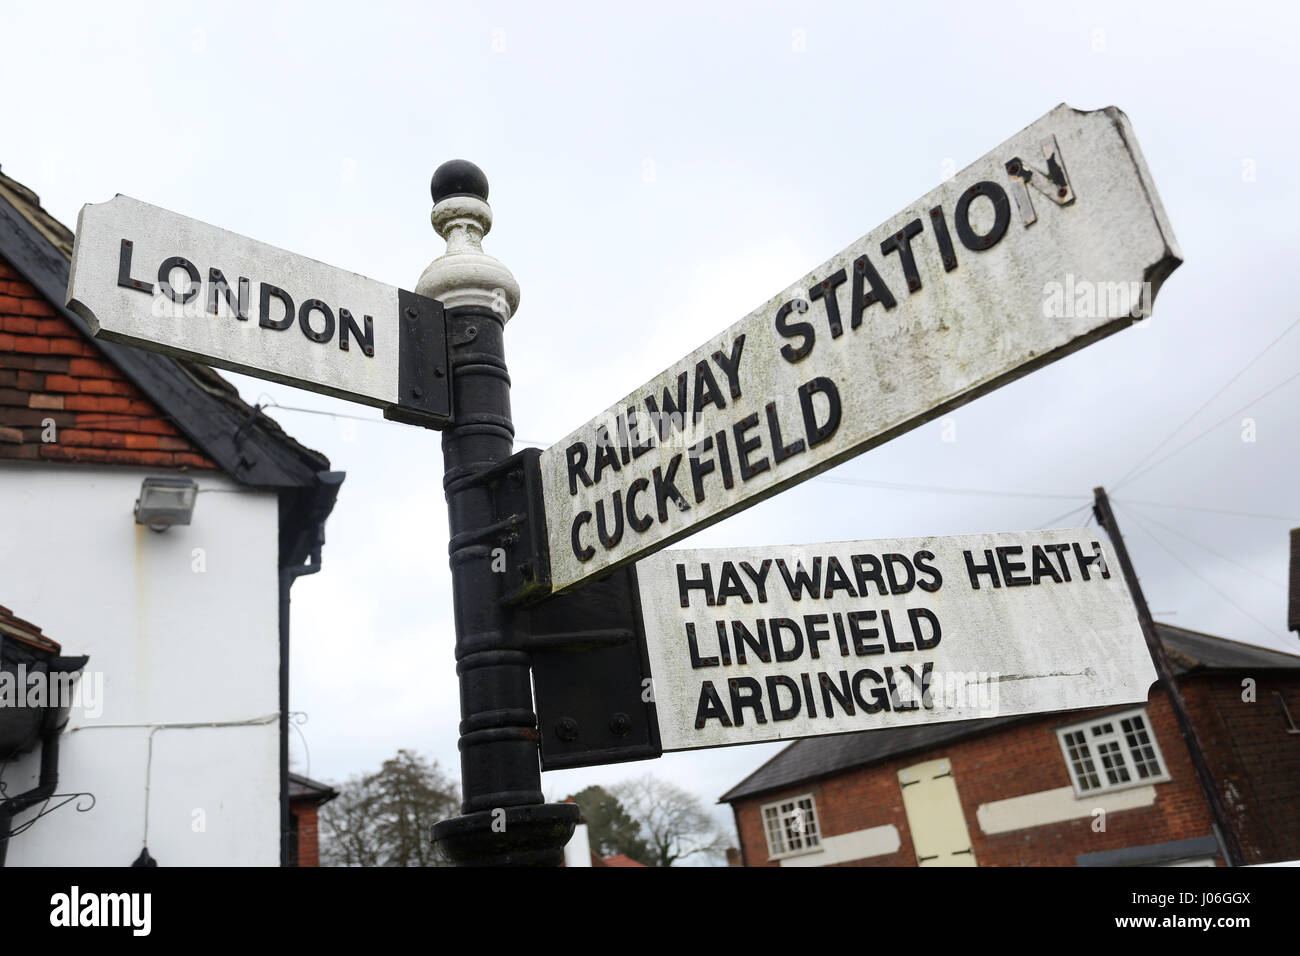 Directions to London on a road sign in Balcombe, East Sussex, UK. Stock Photo